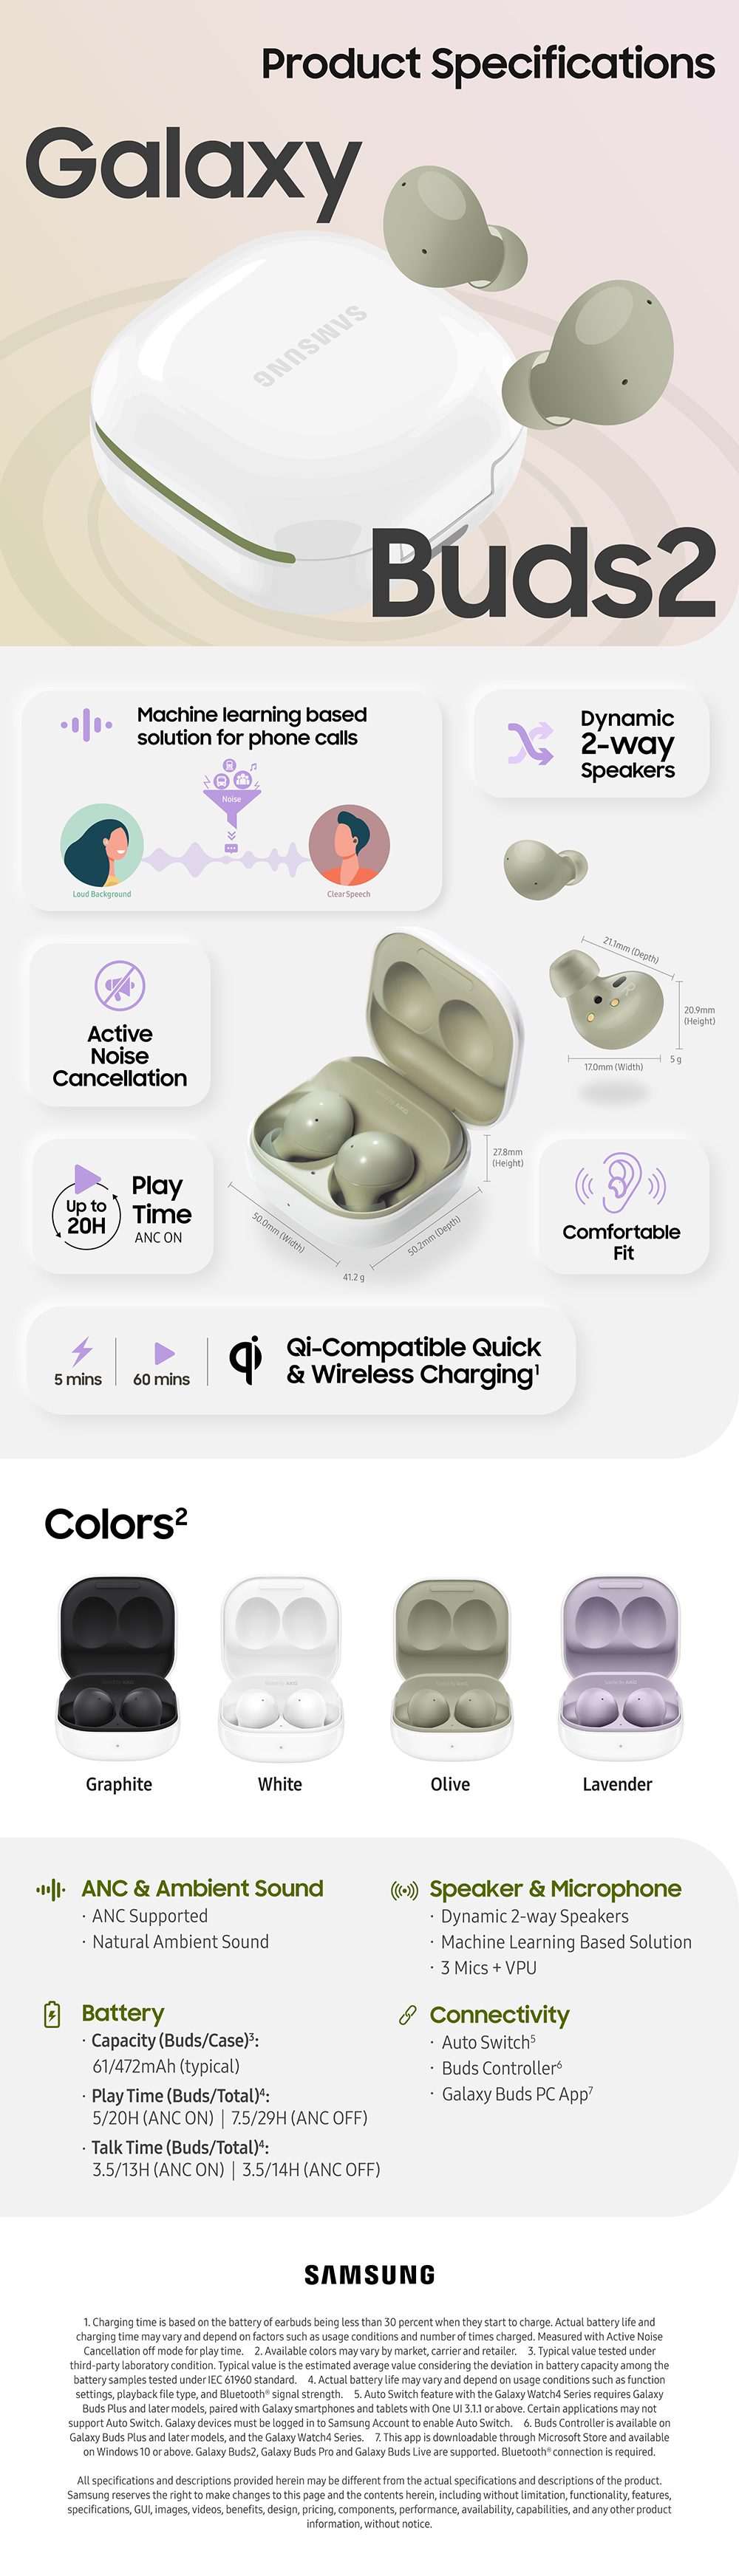 Galaxy Buds2 product specifications